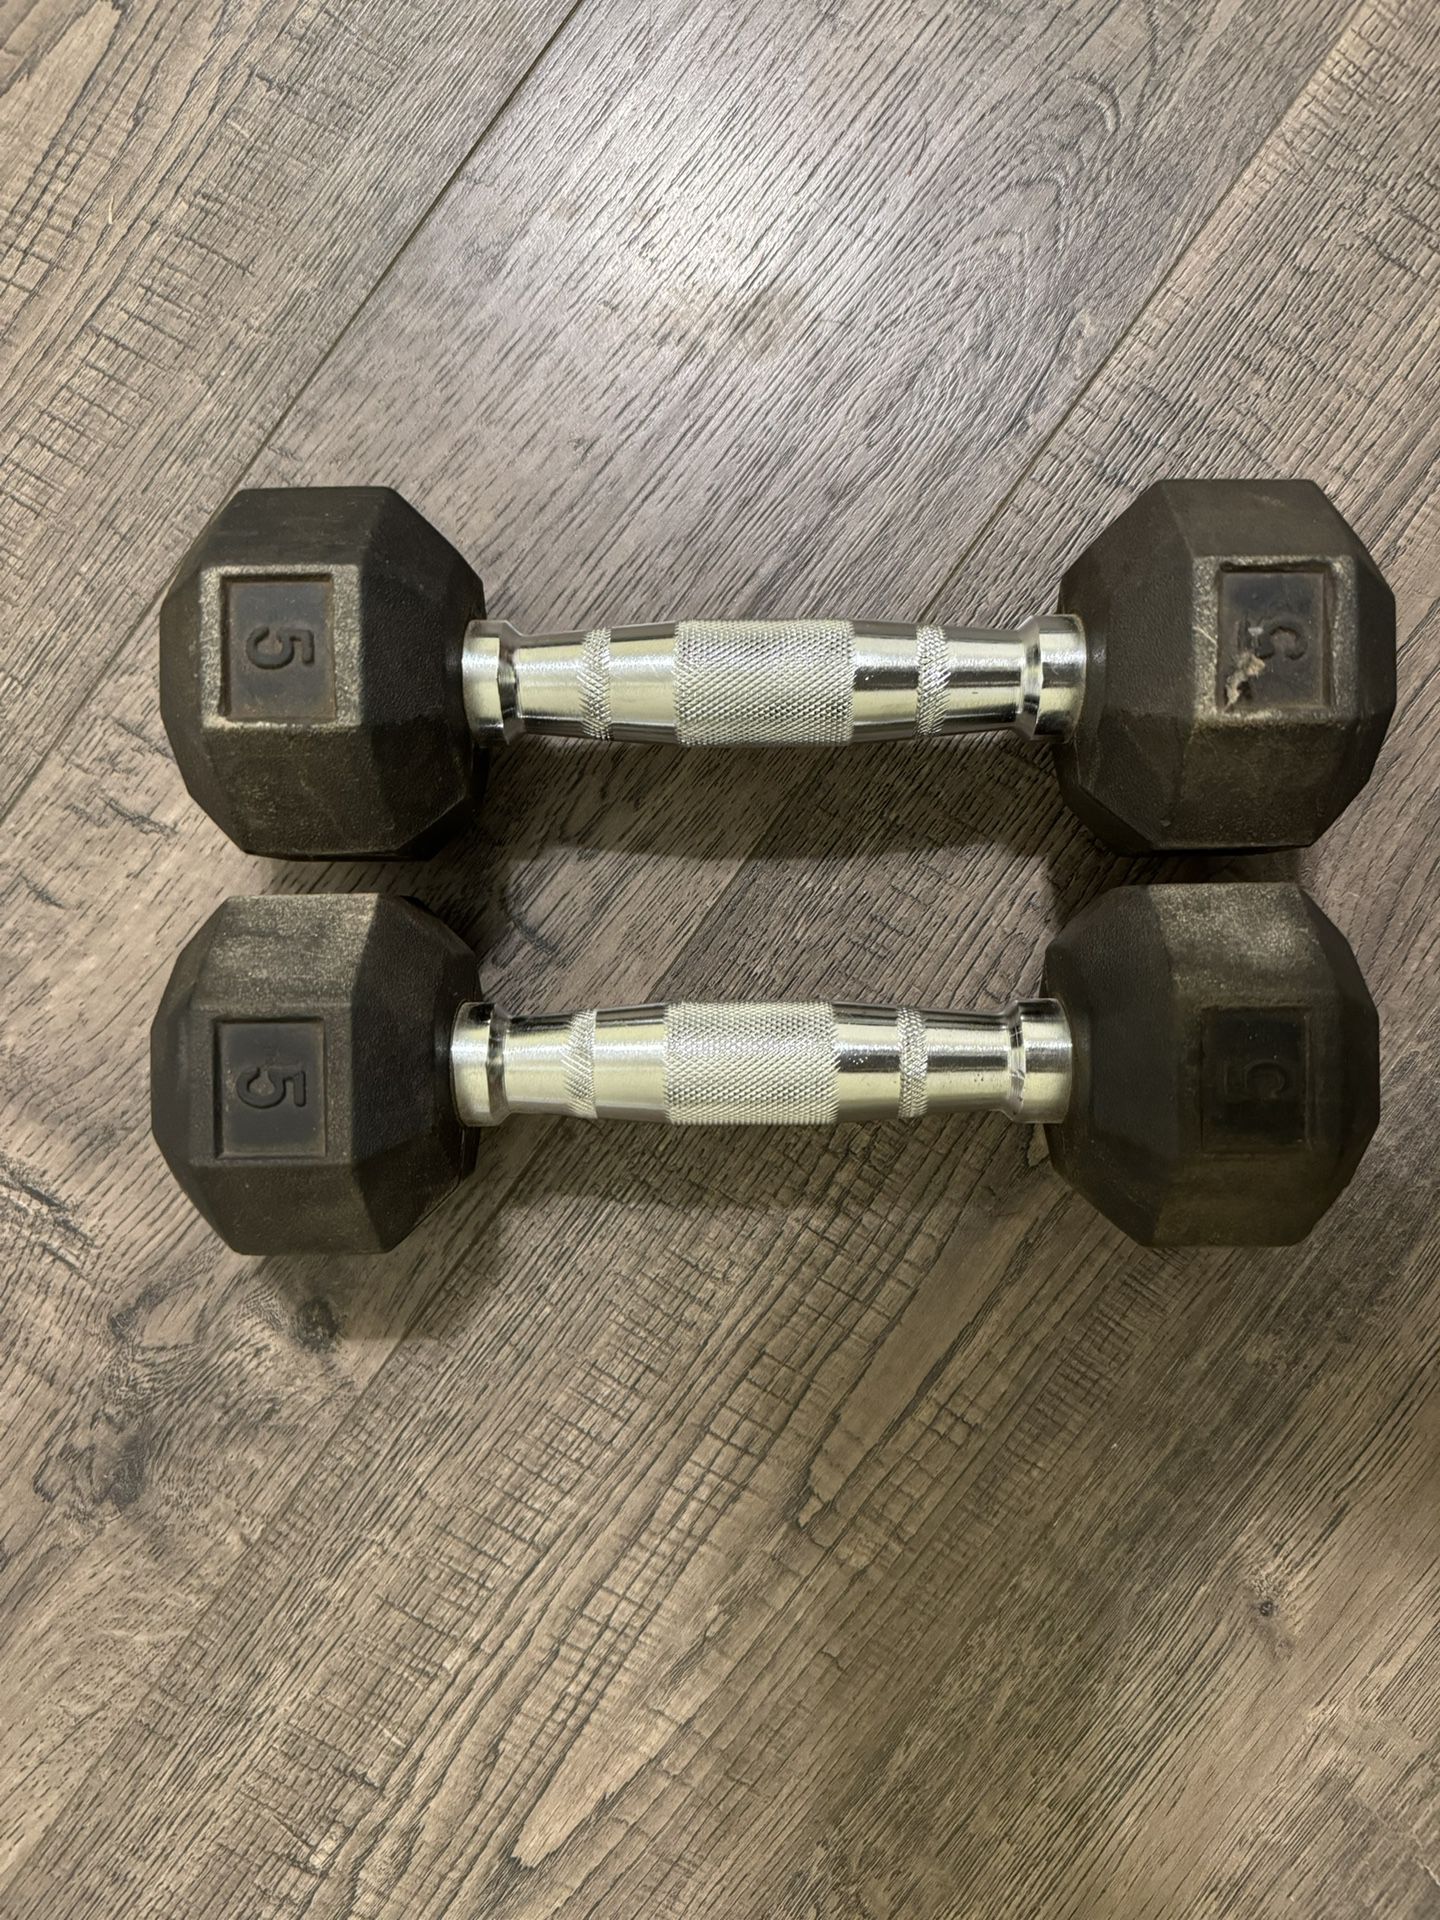 Weights 5 lbs